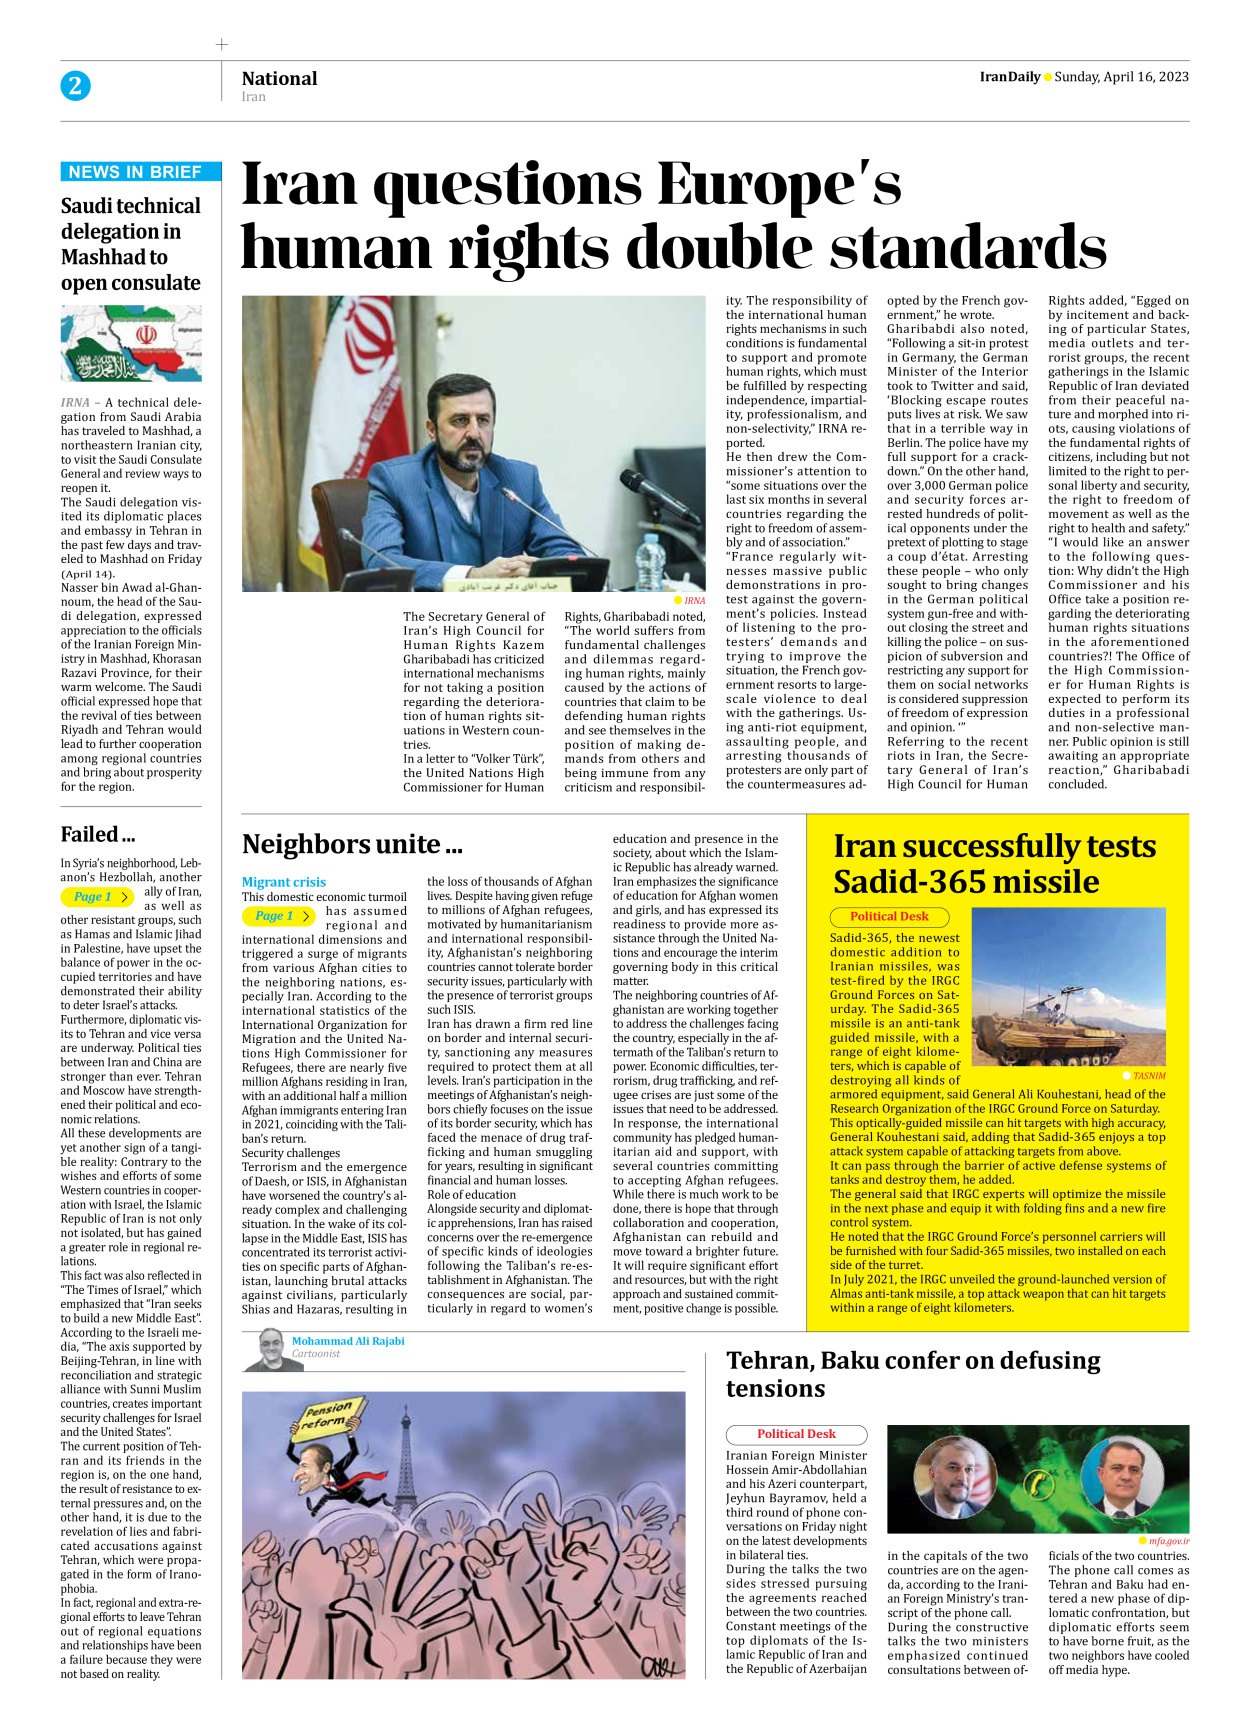 Iran Daily - Number Seven Thousand Two Hundred and Sixty Nine - 16 April 2023 - Page 2